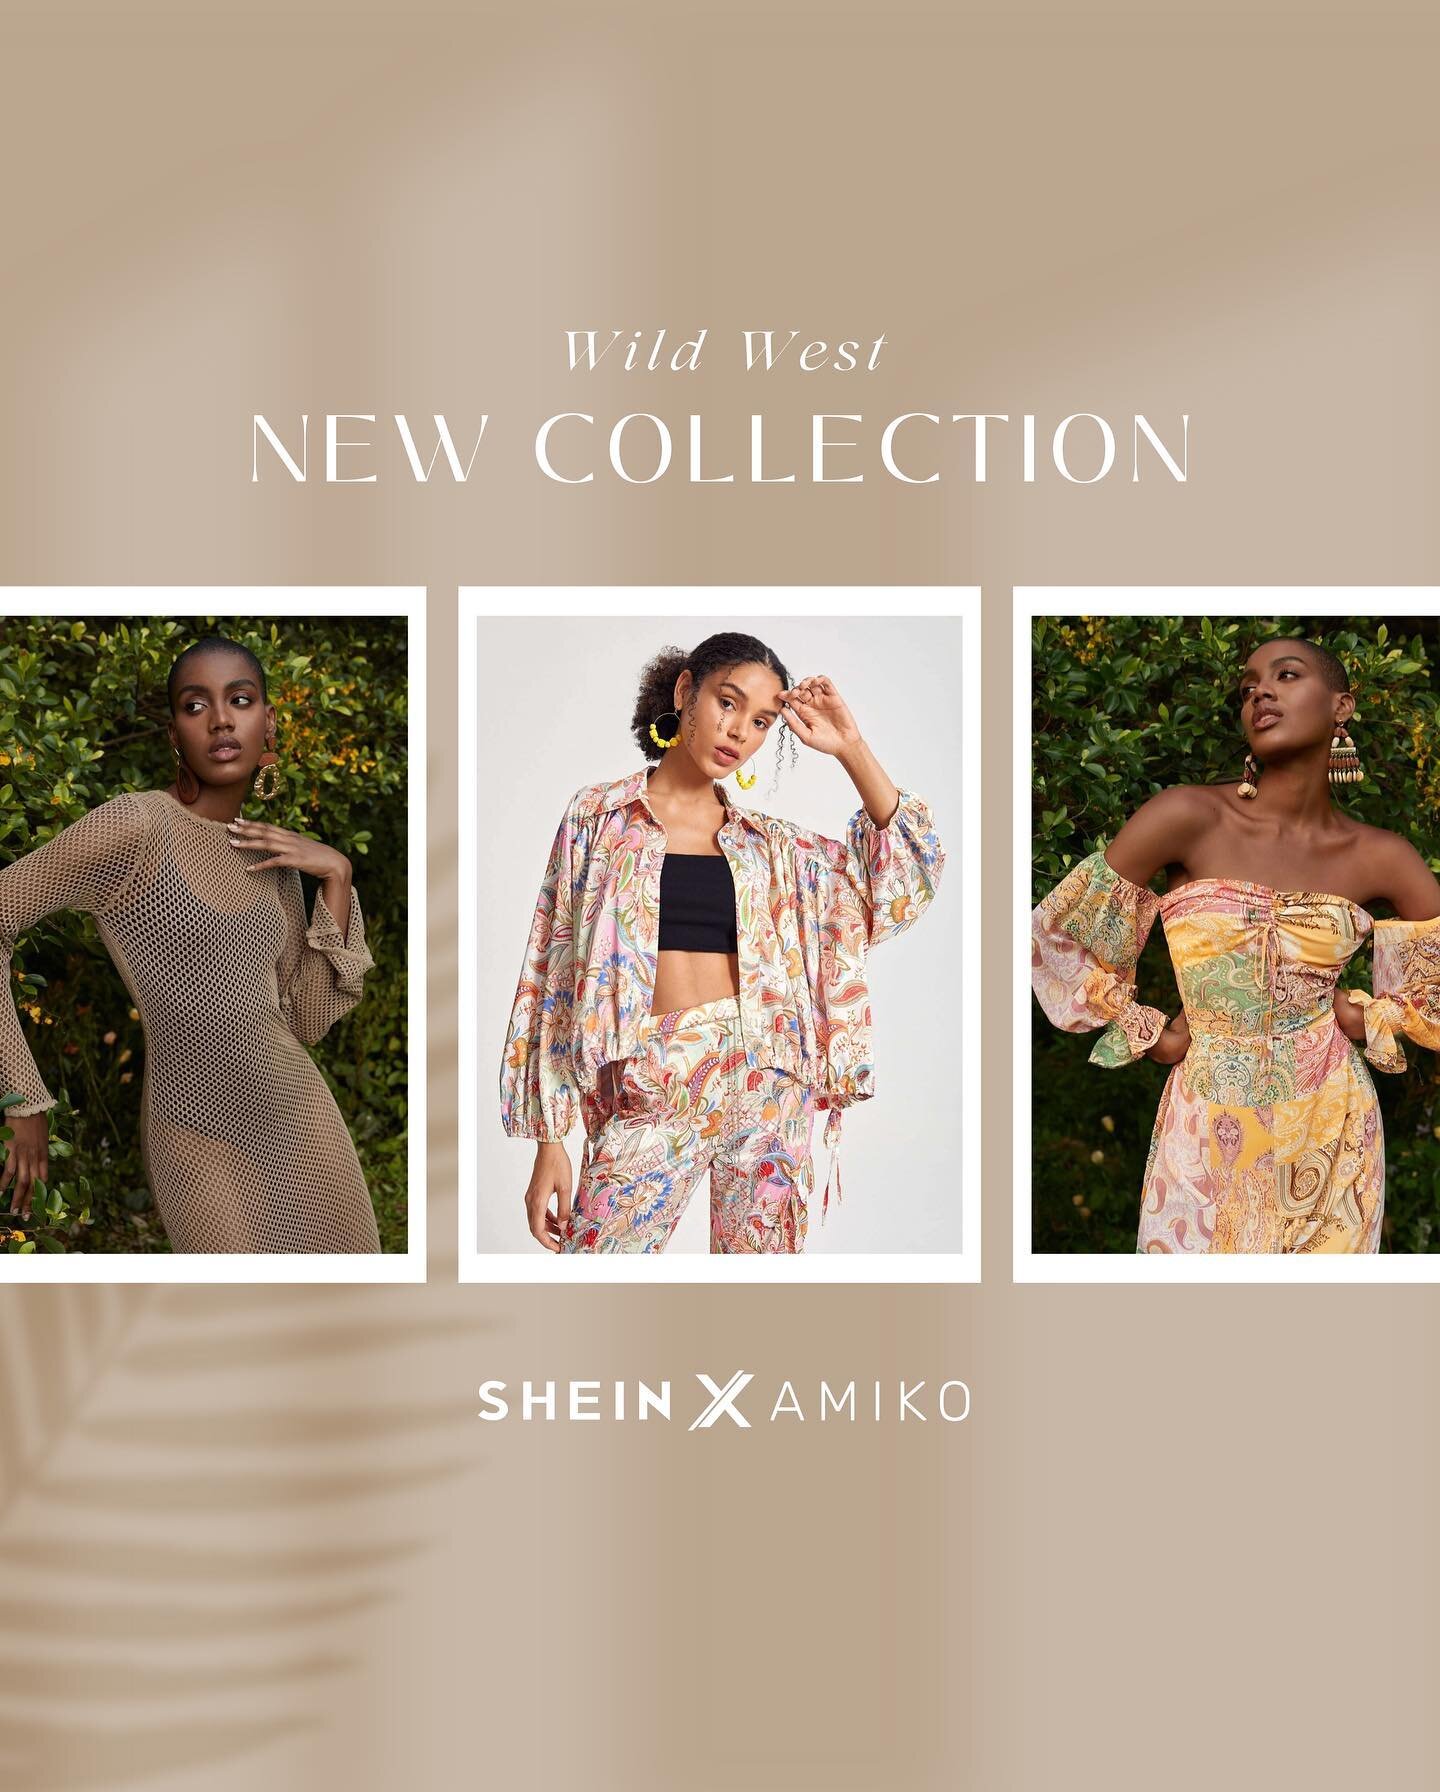 🤍 My new 'Wild West' collection is now available to shop. You can find the link in my bio. Please note that quantities are limited, and re-stocks not guaranteed, so if you see something you love, don't wait too long. 

Thank you to the amazing team 